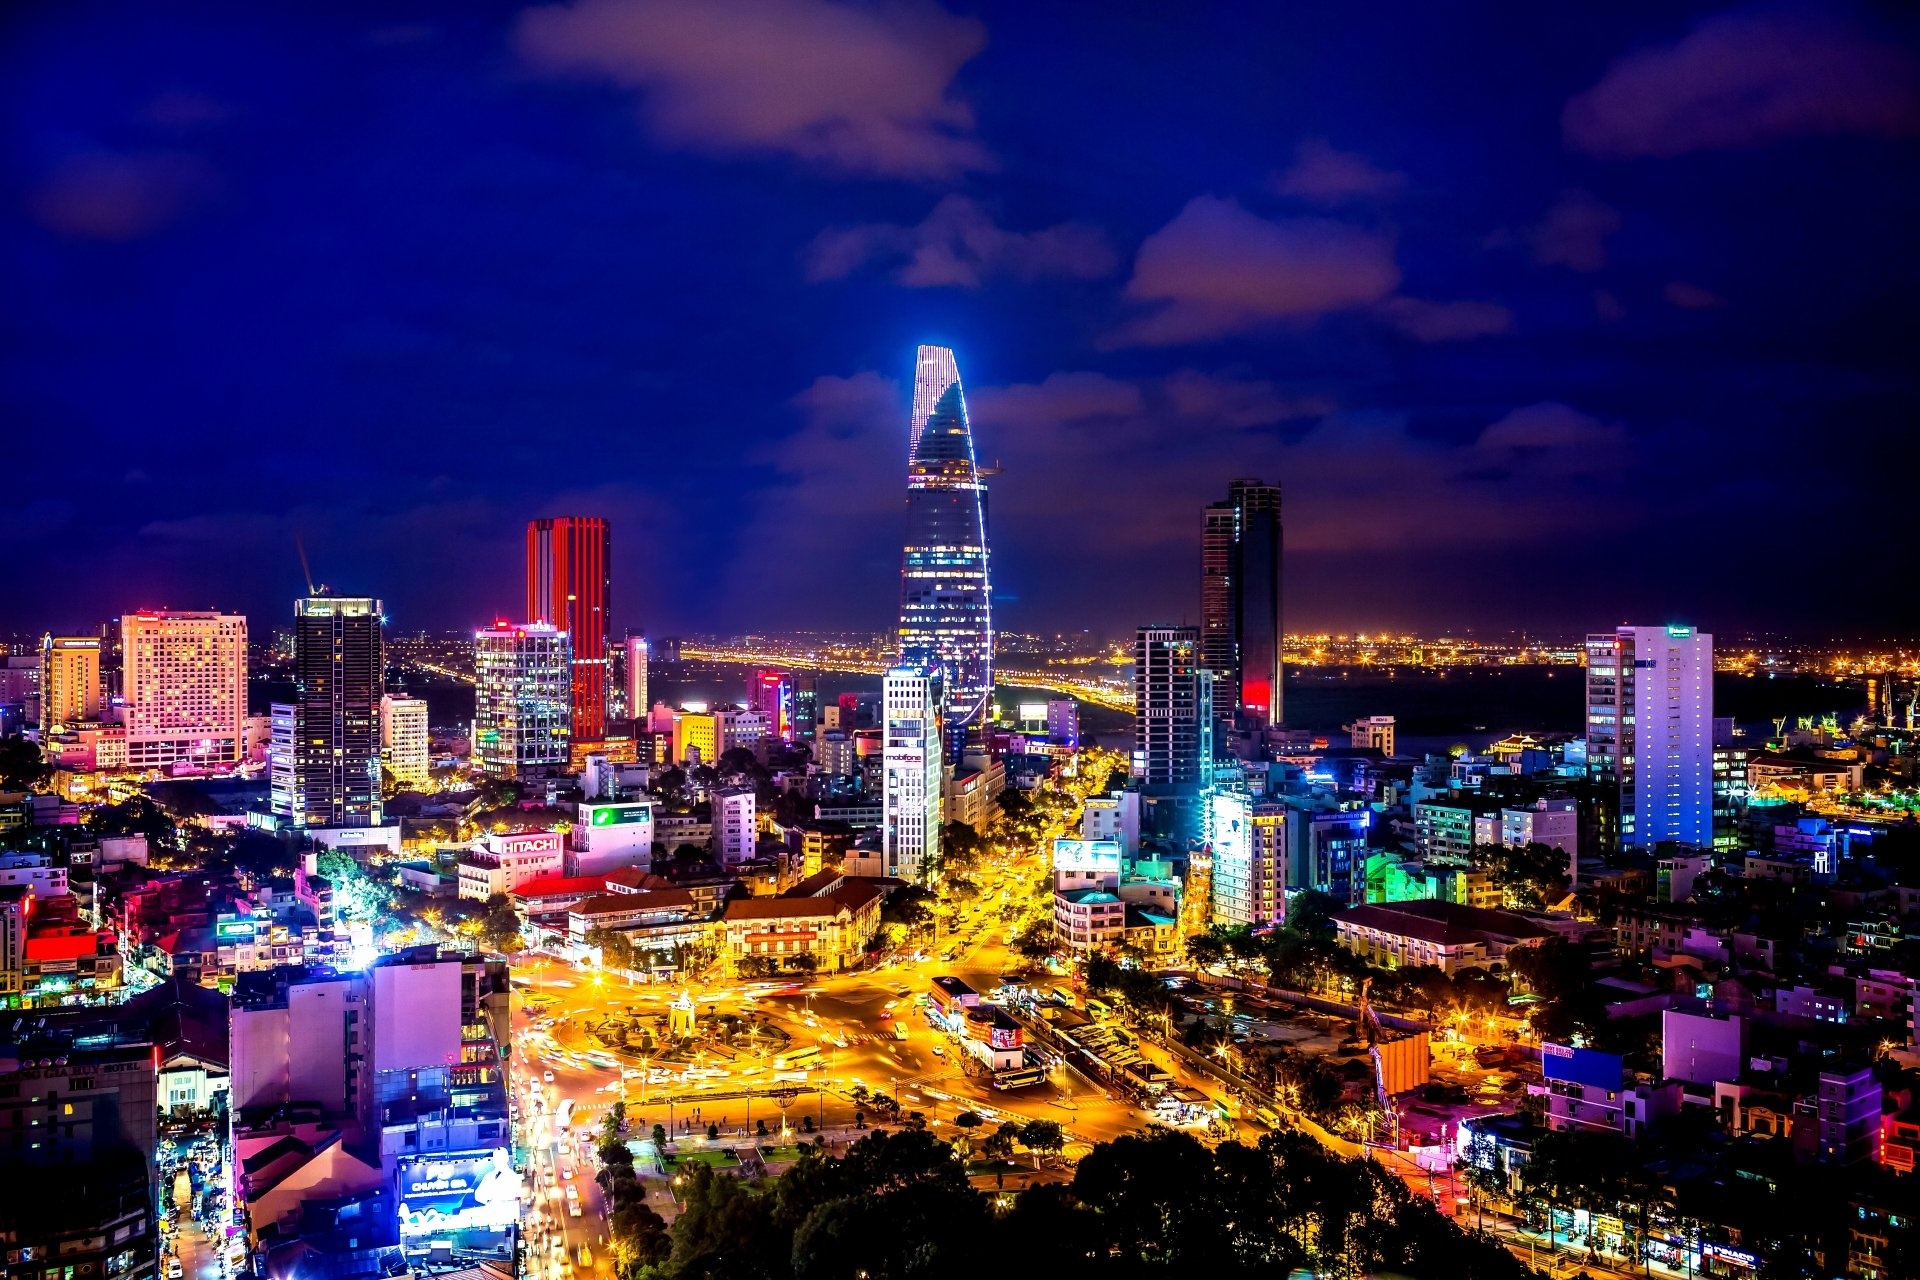 Ho Chi Minh City, HD wallpapers, Background images, Urban scenery, 1920x1280 HD Desktop